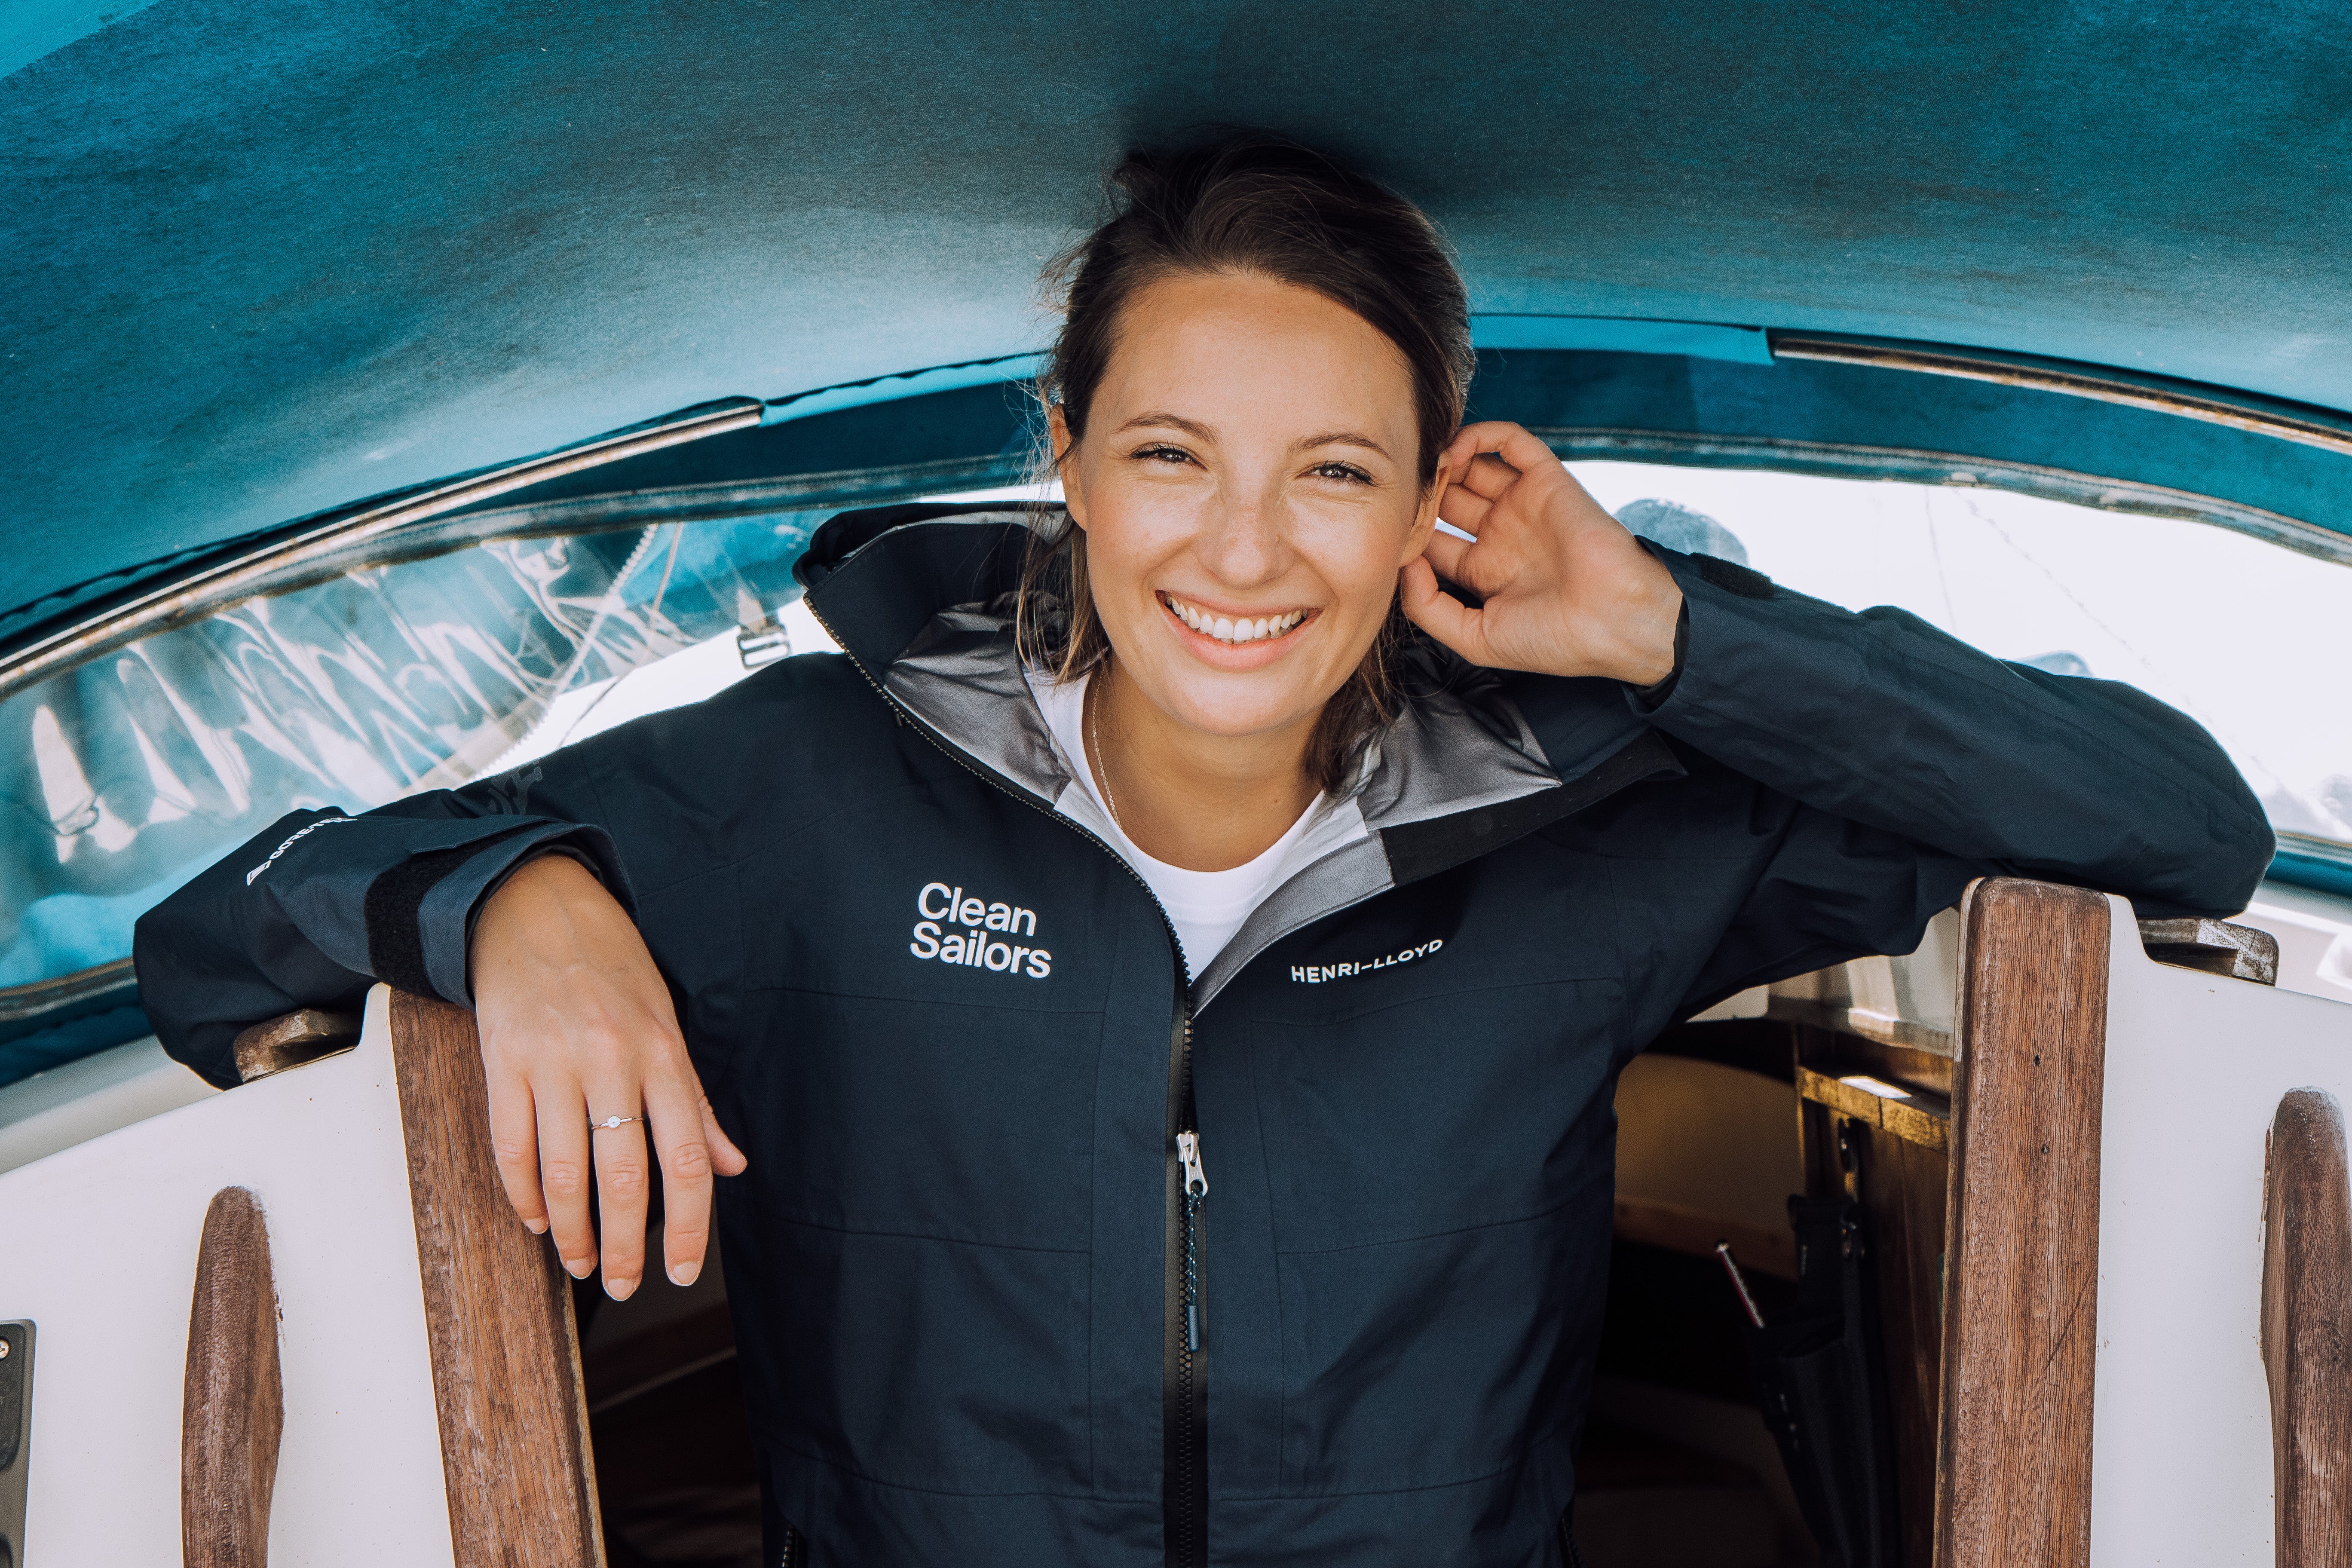 Clean Sailors founder, Holly, appointed as Henri-Lloyd ambassador